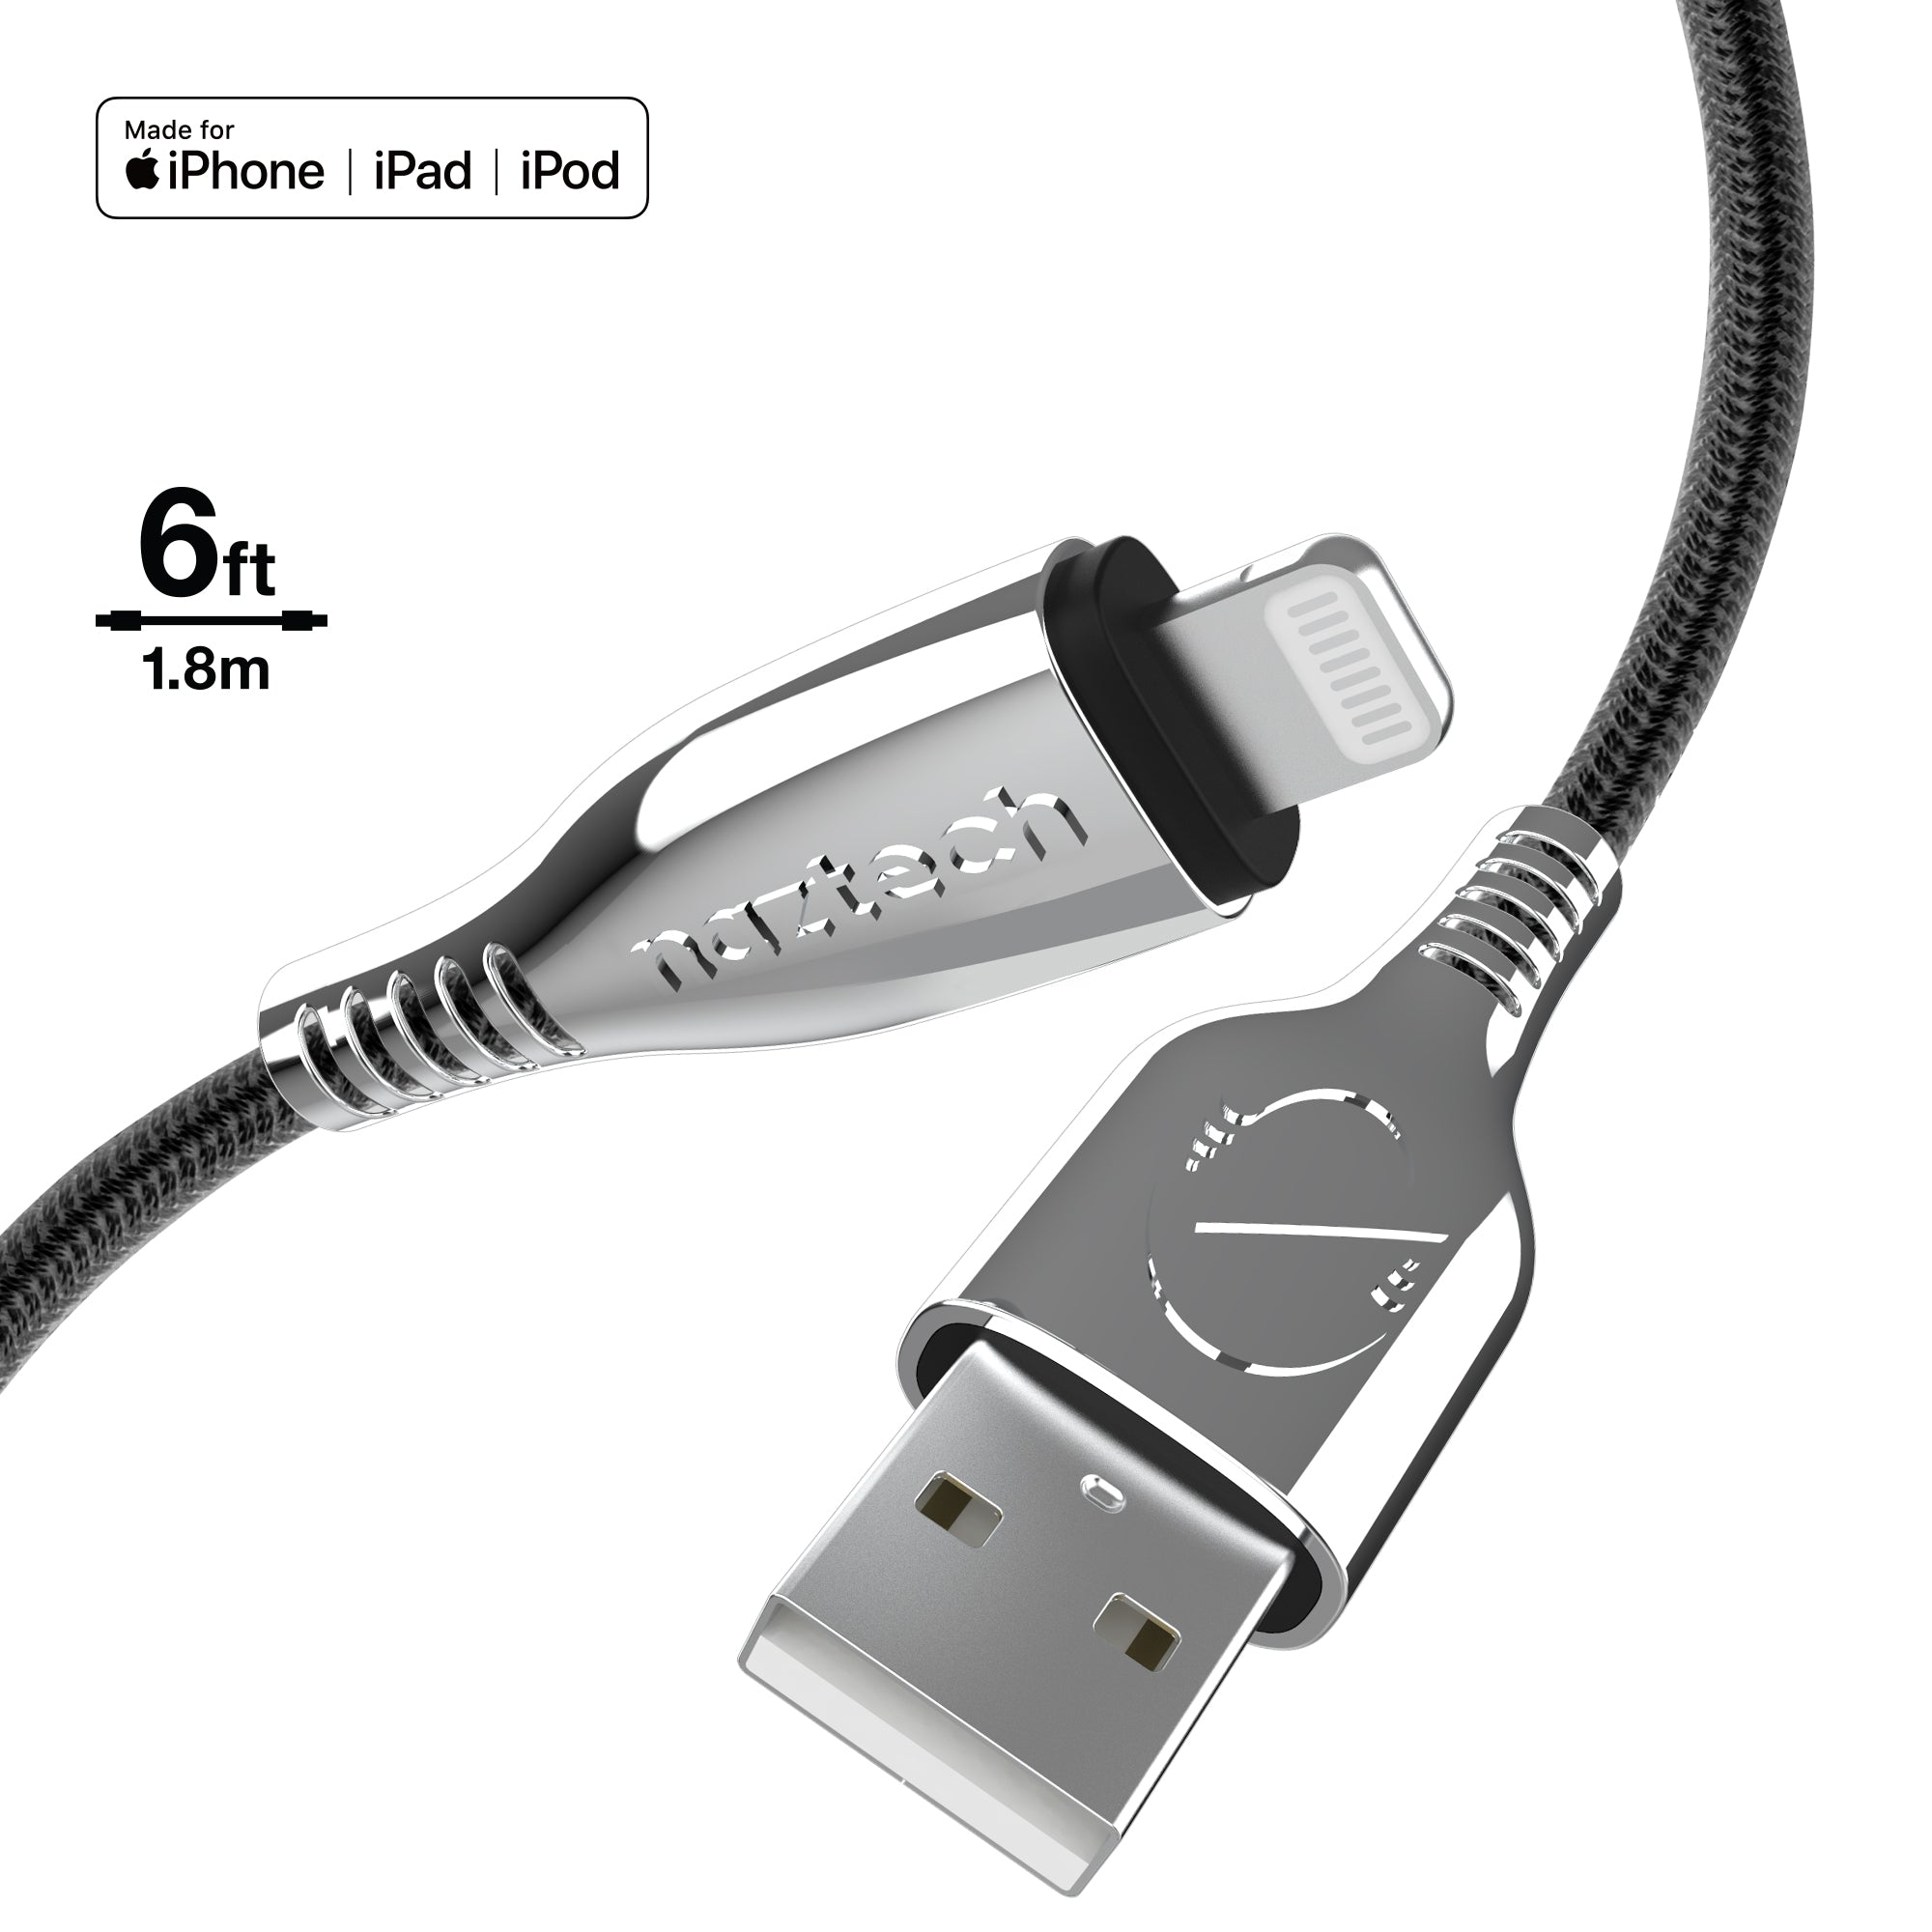 USB to Lightning Cable 6ft Apple Charger Cord BLACK